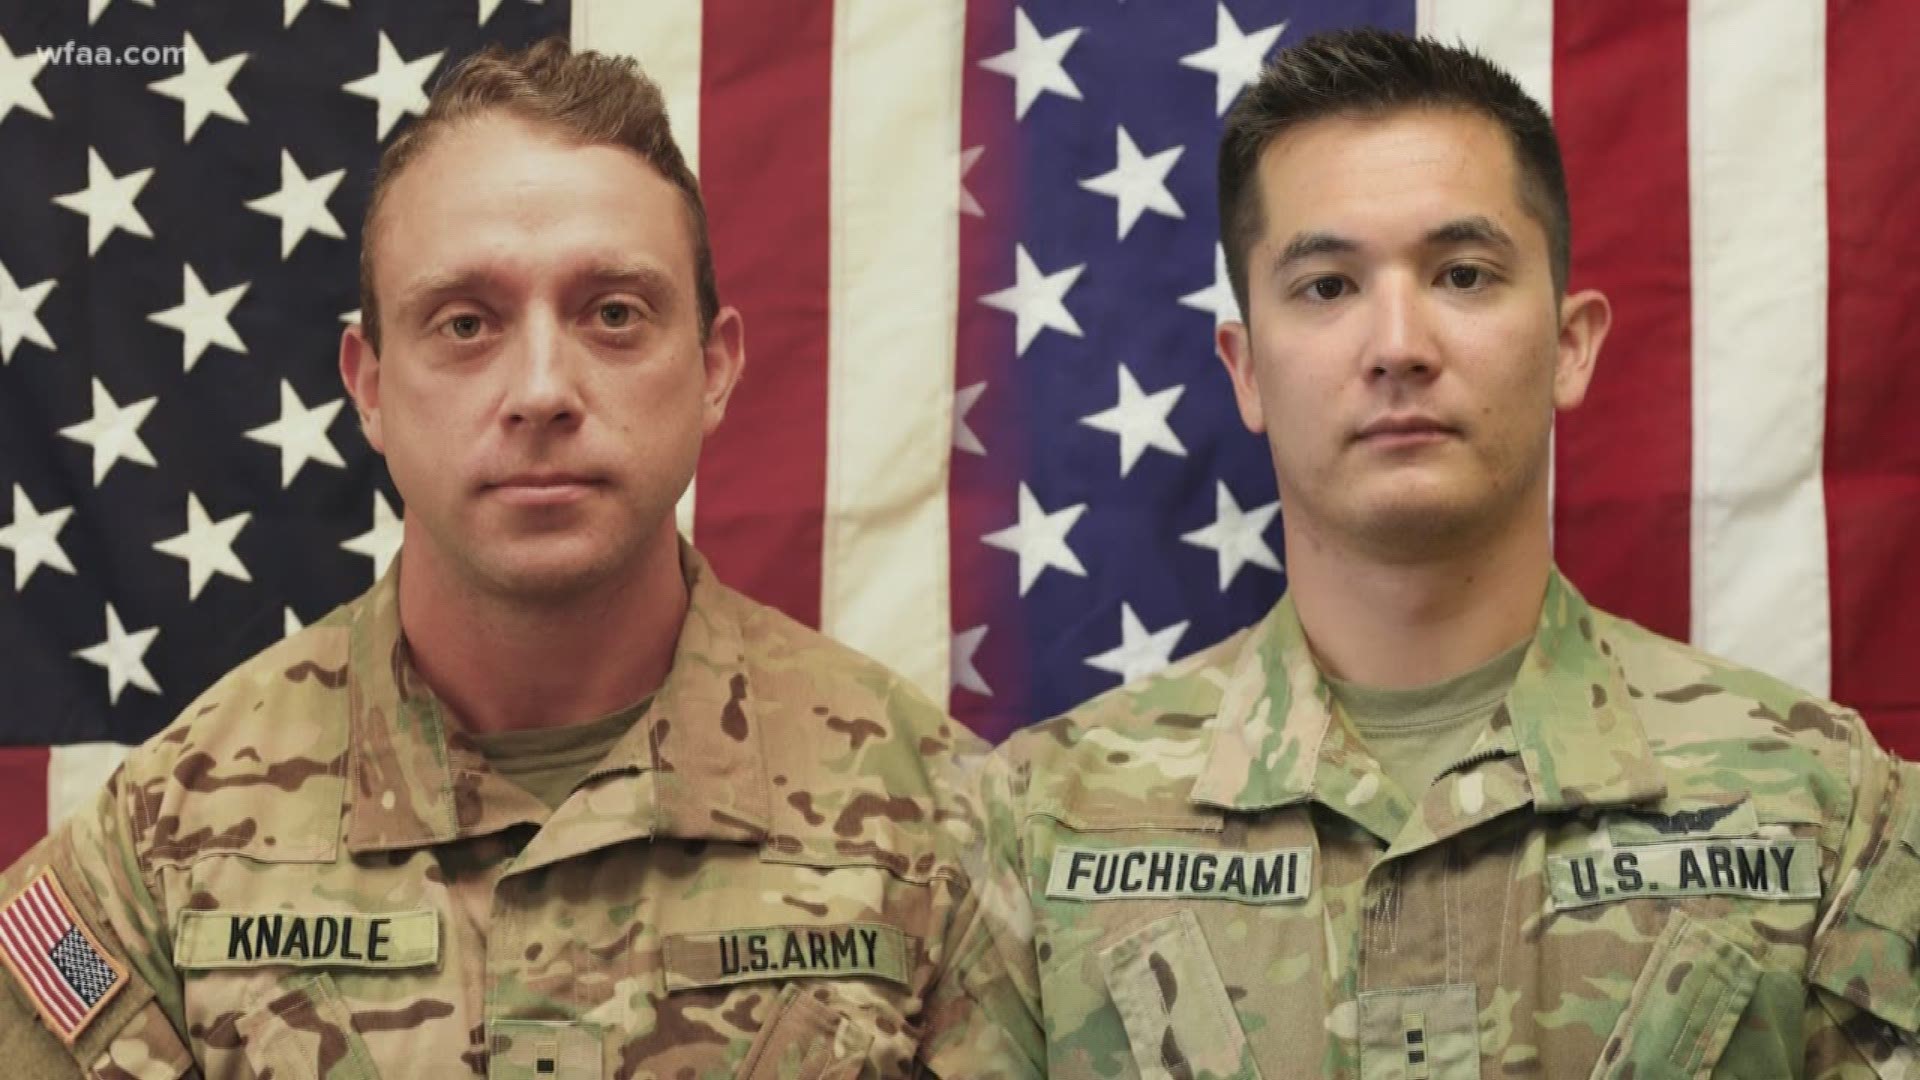 The DOD identified the soldiers Thursday as Chief Warrant Officer 2 David C. Knadle, 33, from Tarrant County, Texas, and Chief Warrant Officer 2 Kirk T. Fuchigami Jr